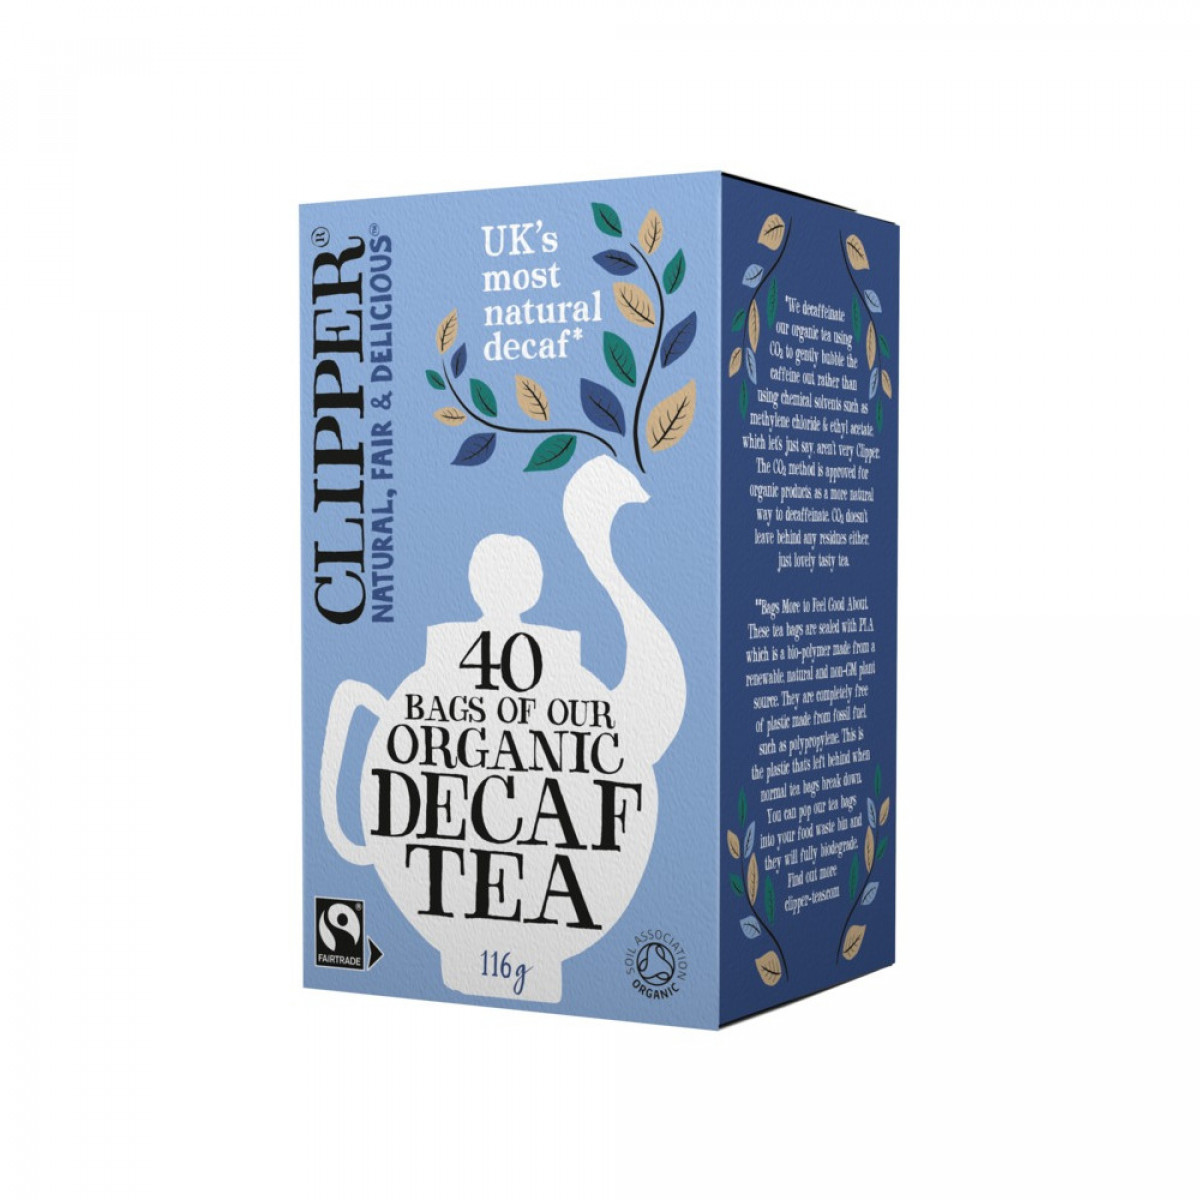 Product picture for Tea bags Decaf